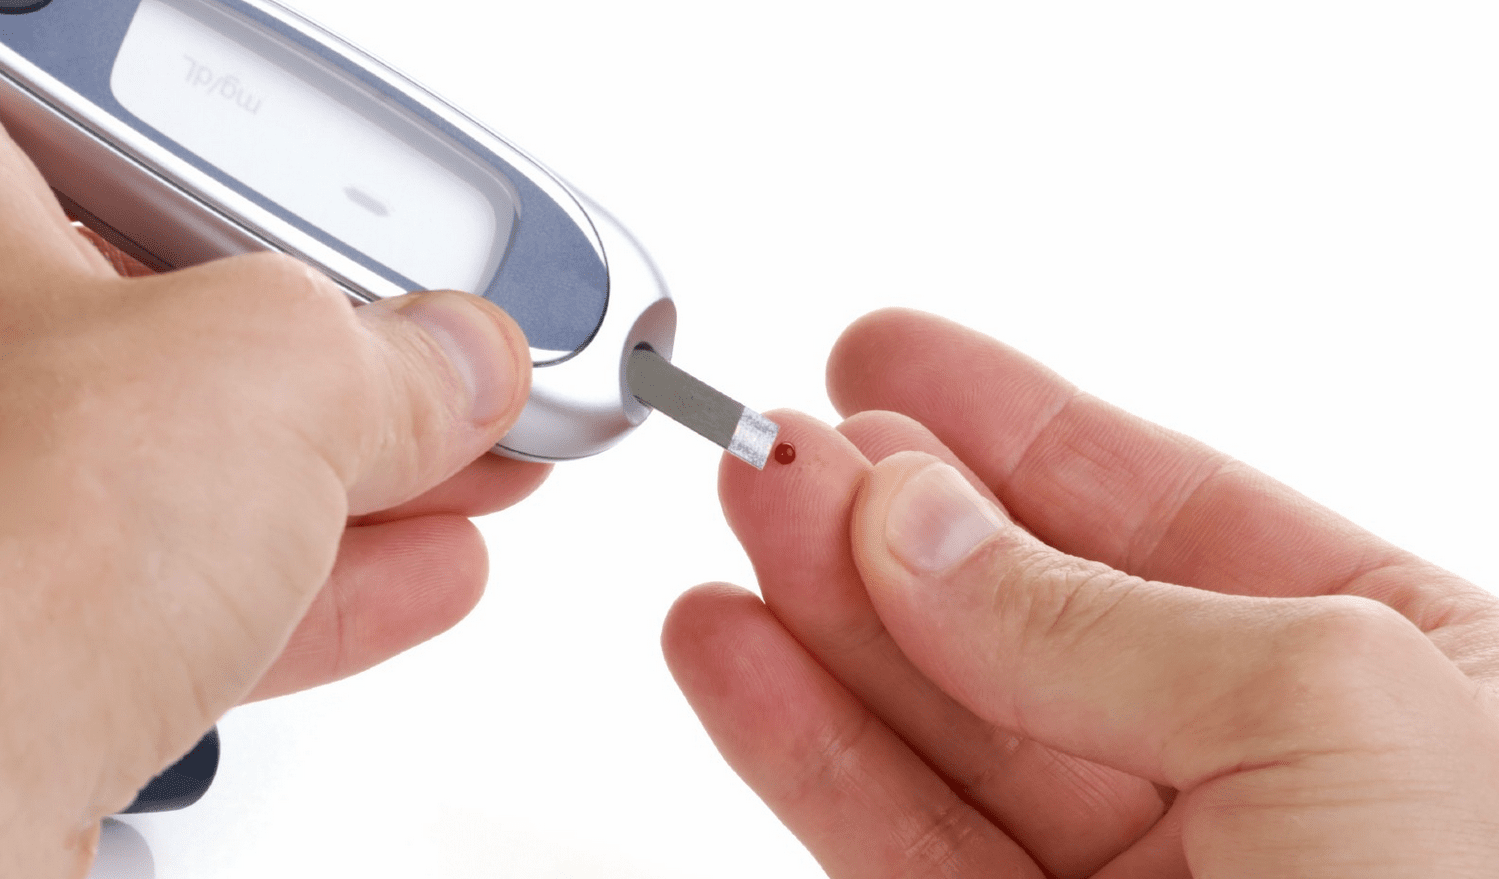 Diabetics: we’re not all the same